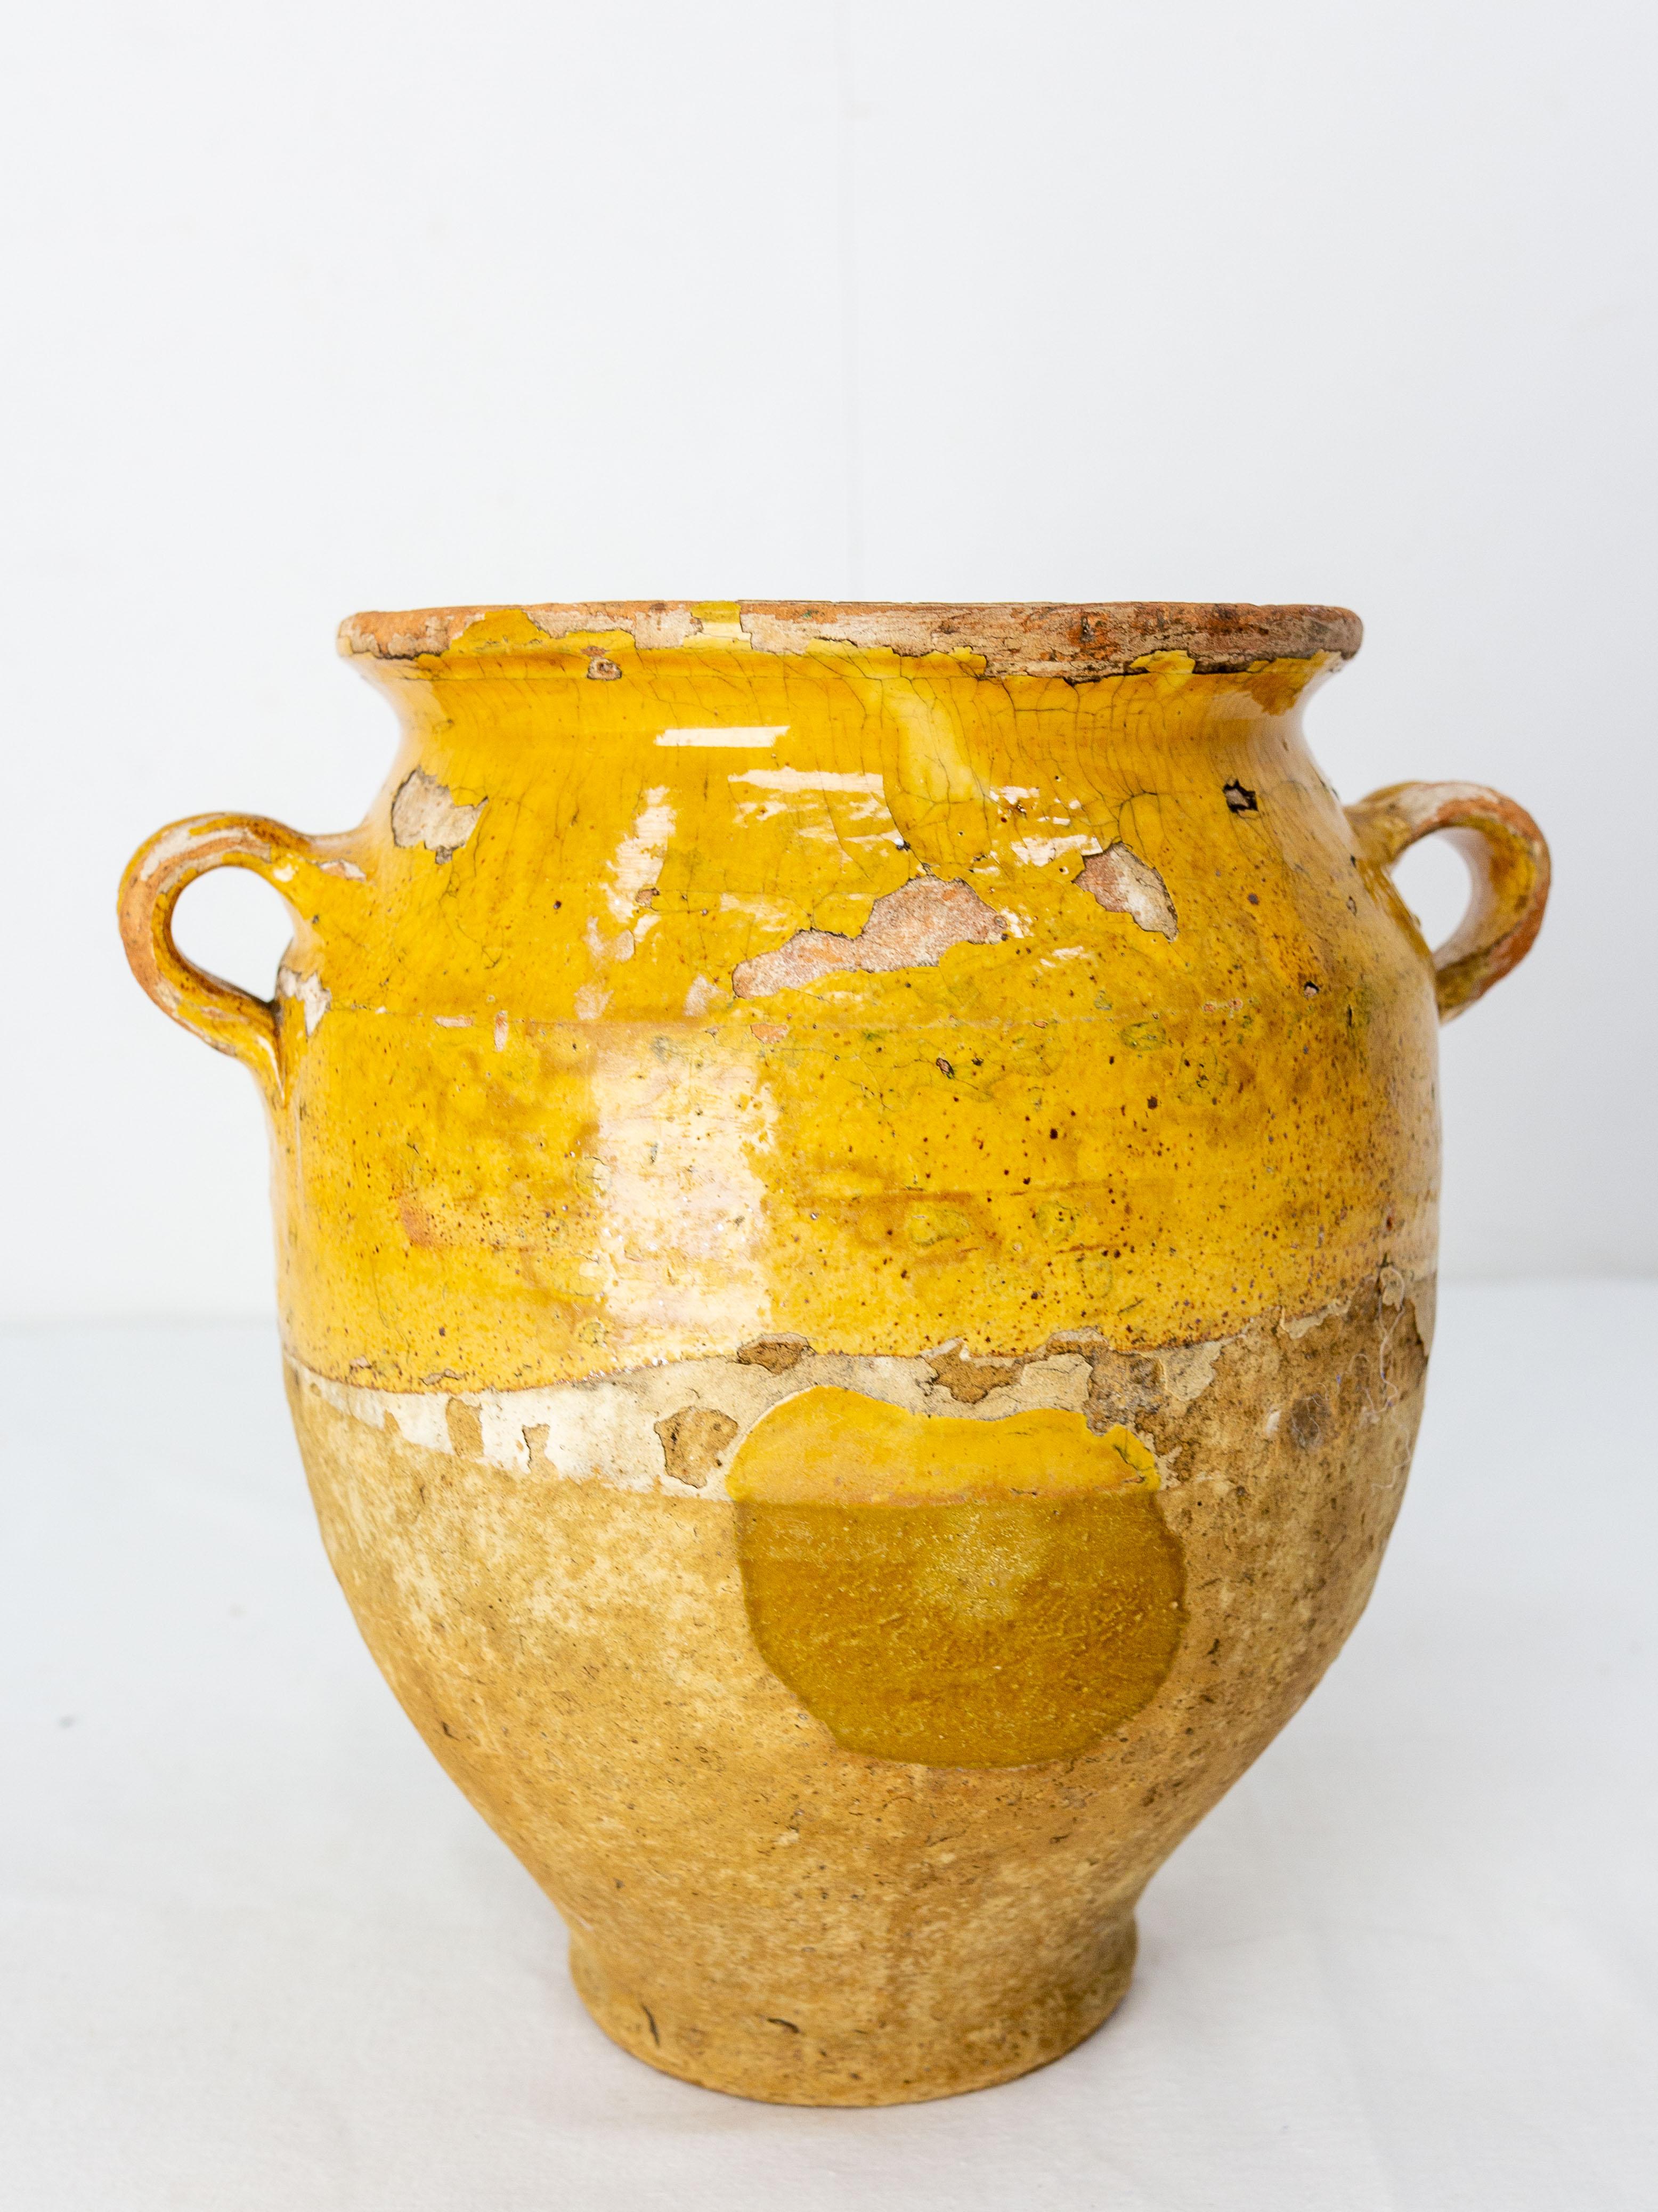 French terracotta confit pot.
Traditional large earthenware pottery confit pot from South West France with yellow glaze.
This vessel was used from the 19th to the mid-20th century to conserve food.
Very decorative.
Good patina and bright yellow